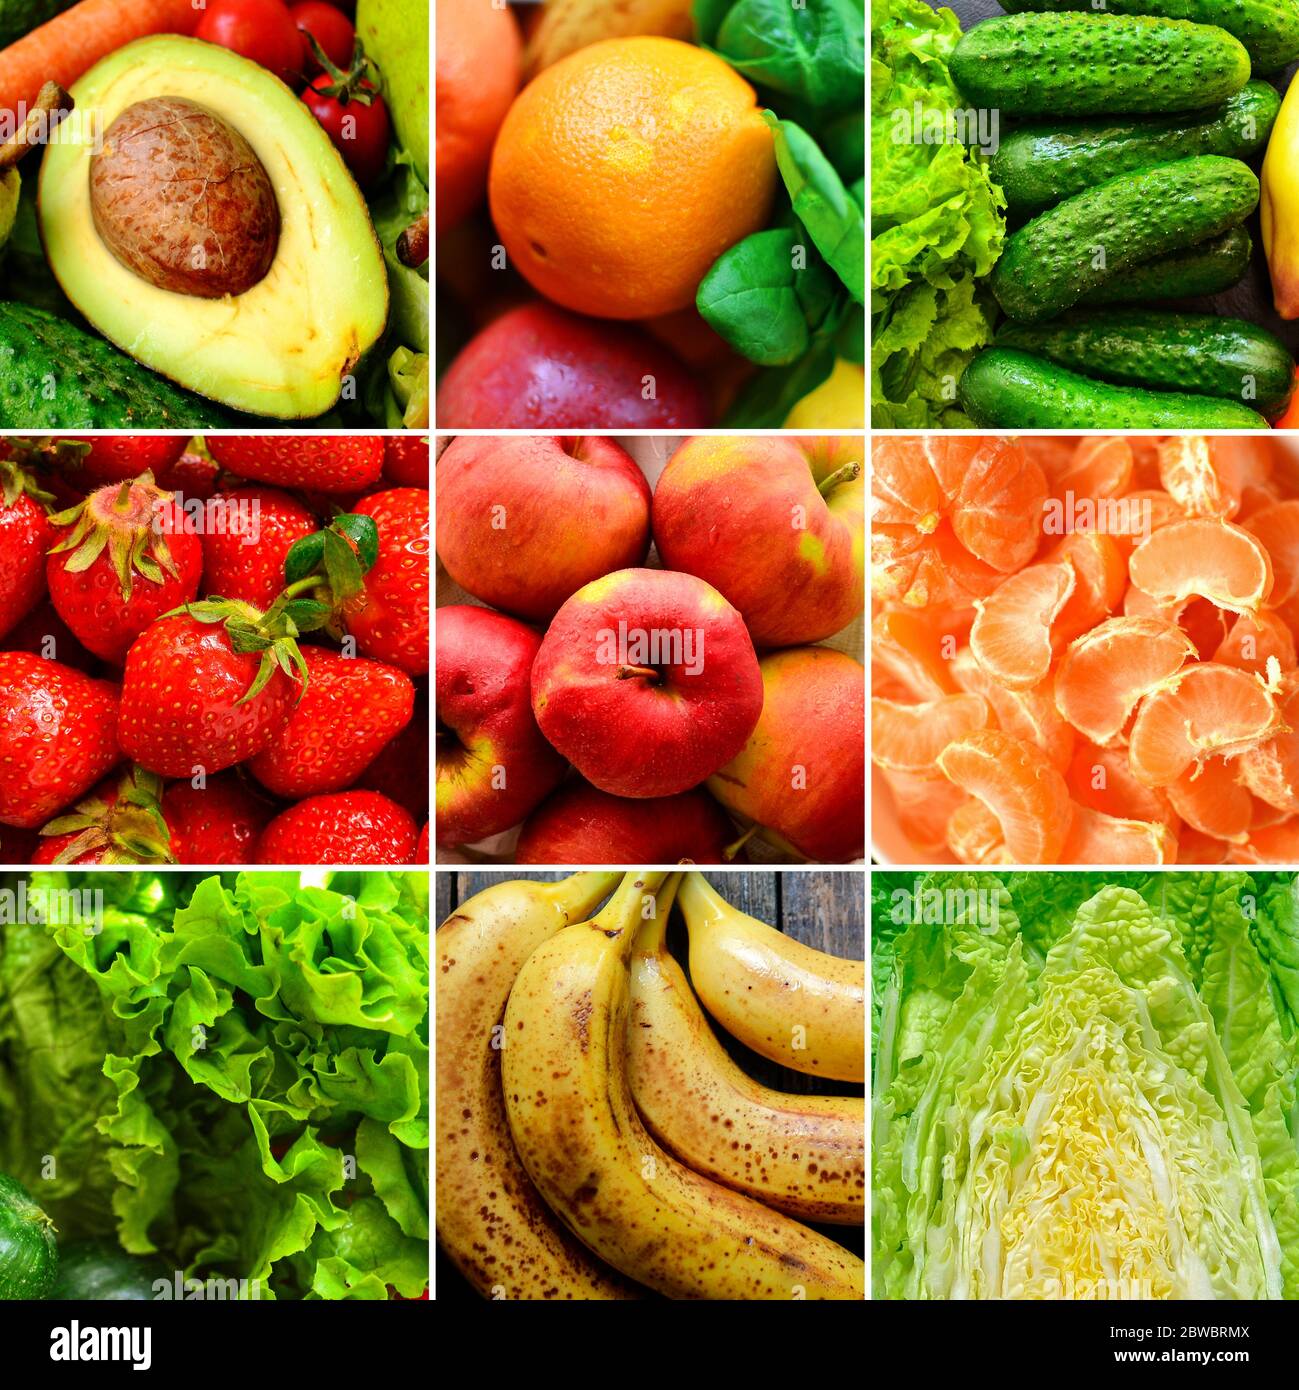 Collage. Vegetables and fruits close-up, top view. Bright summer food, apples, tomatoes, strawberries, cucumbers, bananas, tangerines. Vitamins Stock Photo